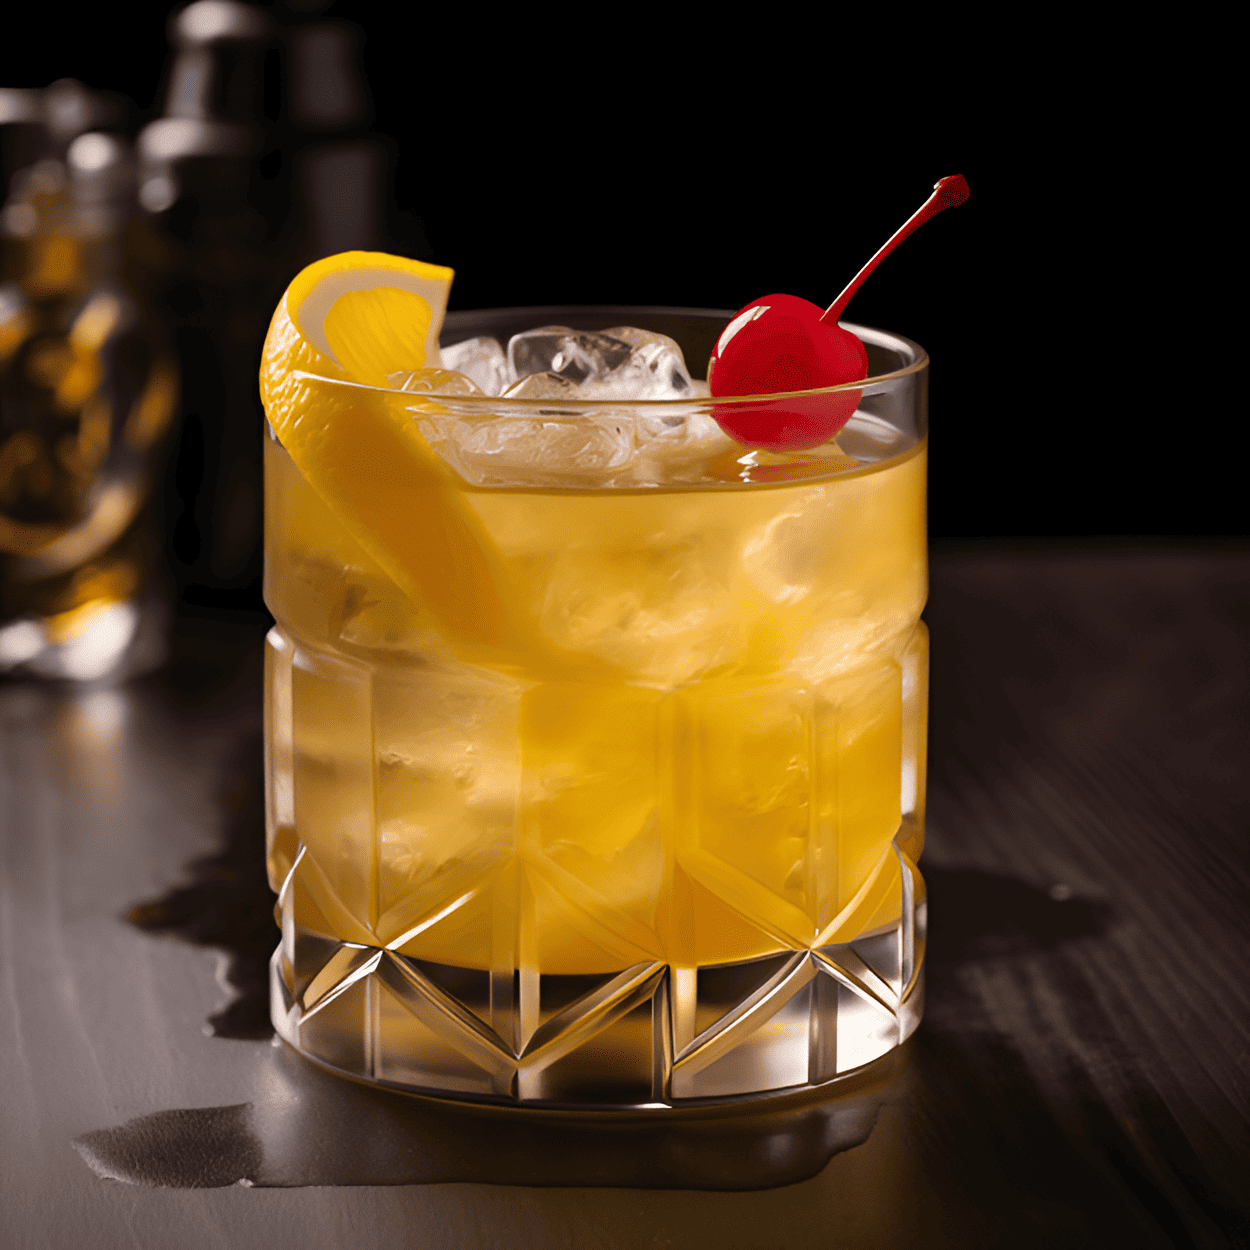 Disaronno Sour Cocktail Recipe - The Disaronno Sour is a sweet, sour, and slightly nutty cocktail. The combination of Disaronno and lemon juice creates a harmonious balance of flavors, with the almond notes from the liqueur adding depth and complexity. The cocktail is both refreshing and satisfying, making it perfect for sipping on a warm summer evening or as a palate cleanser after a rich meal.